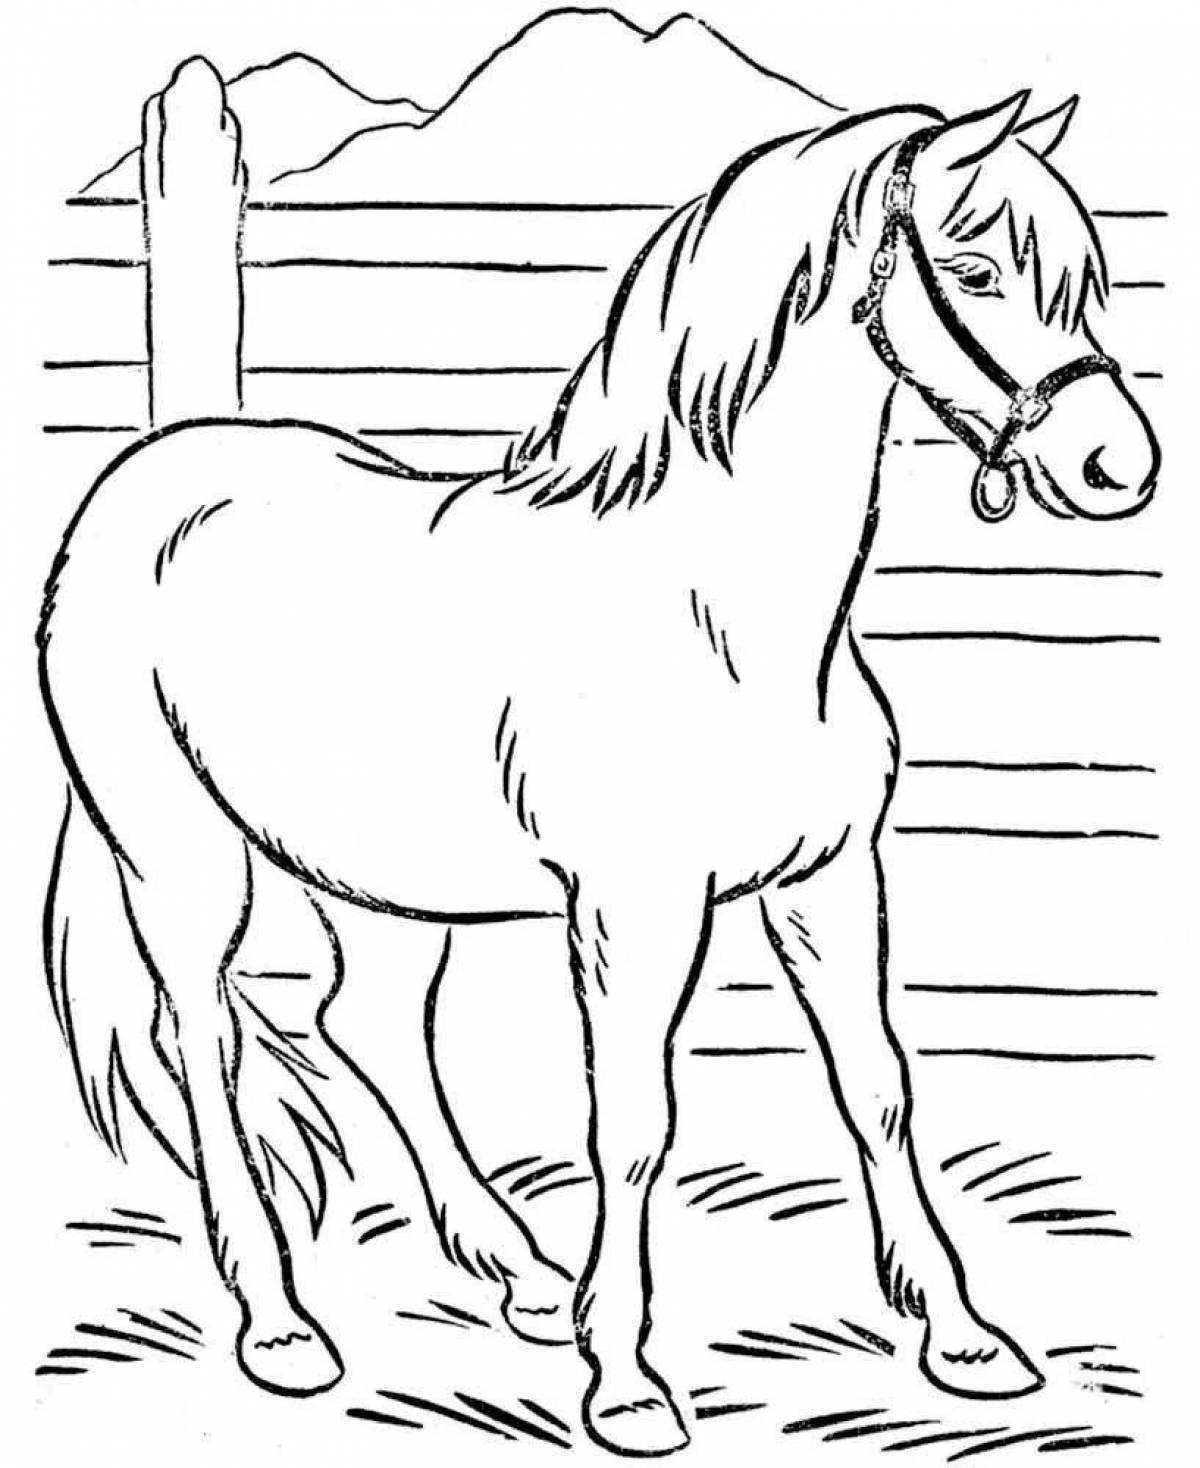 Fantastic horse coloring book for children 4-5 years old